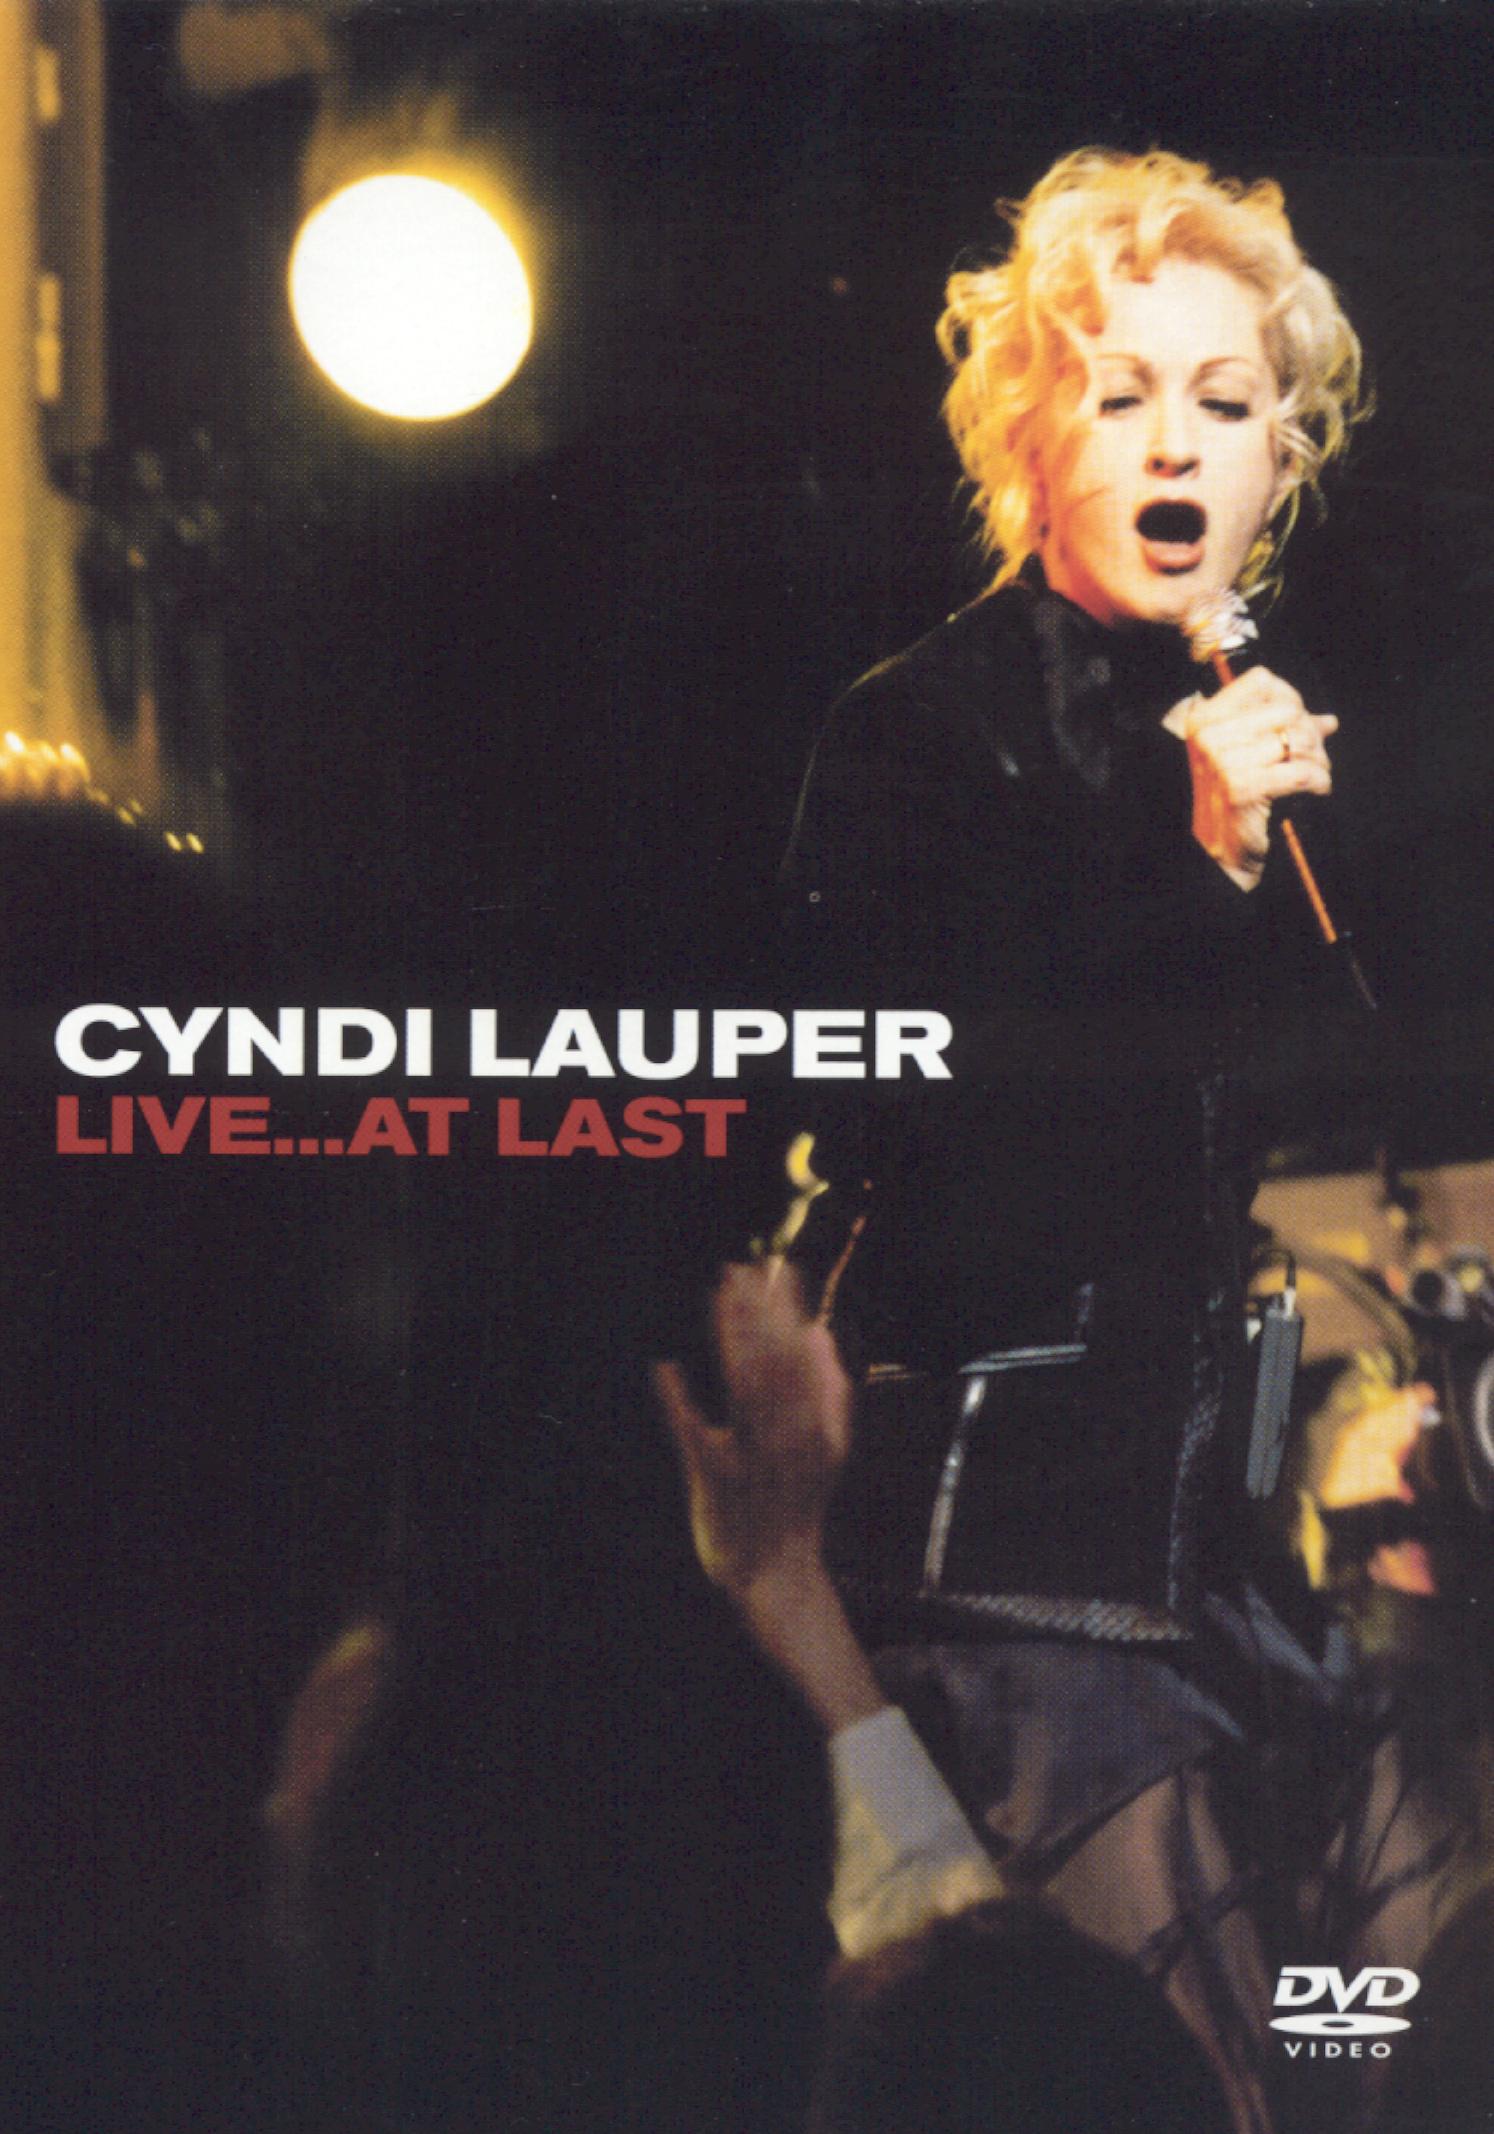 Cyndi Lauper Live At Last 2004 Synopsis Characteristics Moods Themes And Related 